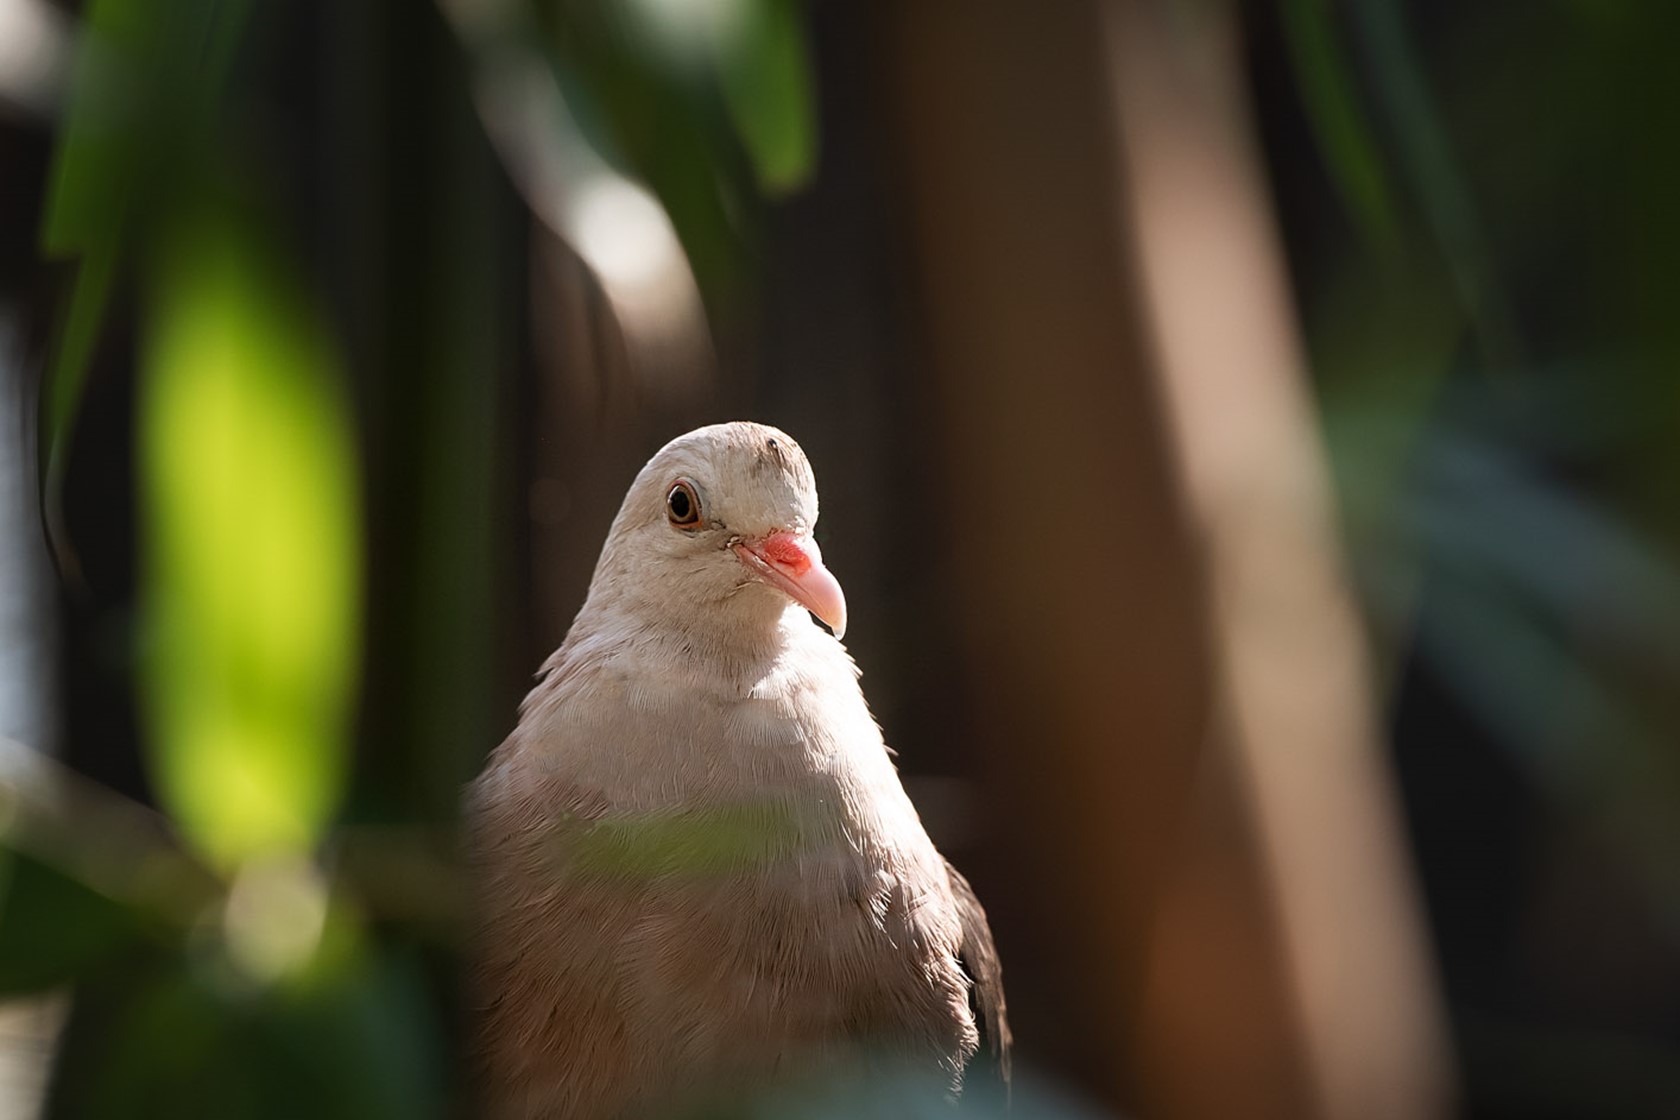 Pink pigeon sits on a perch